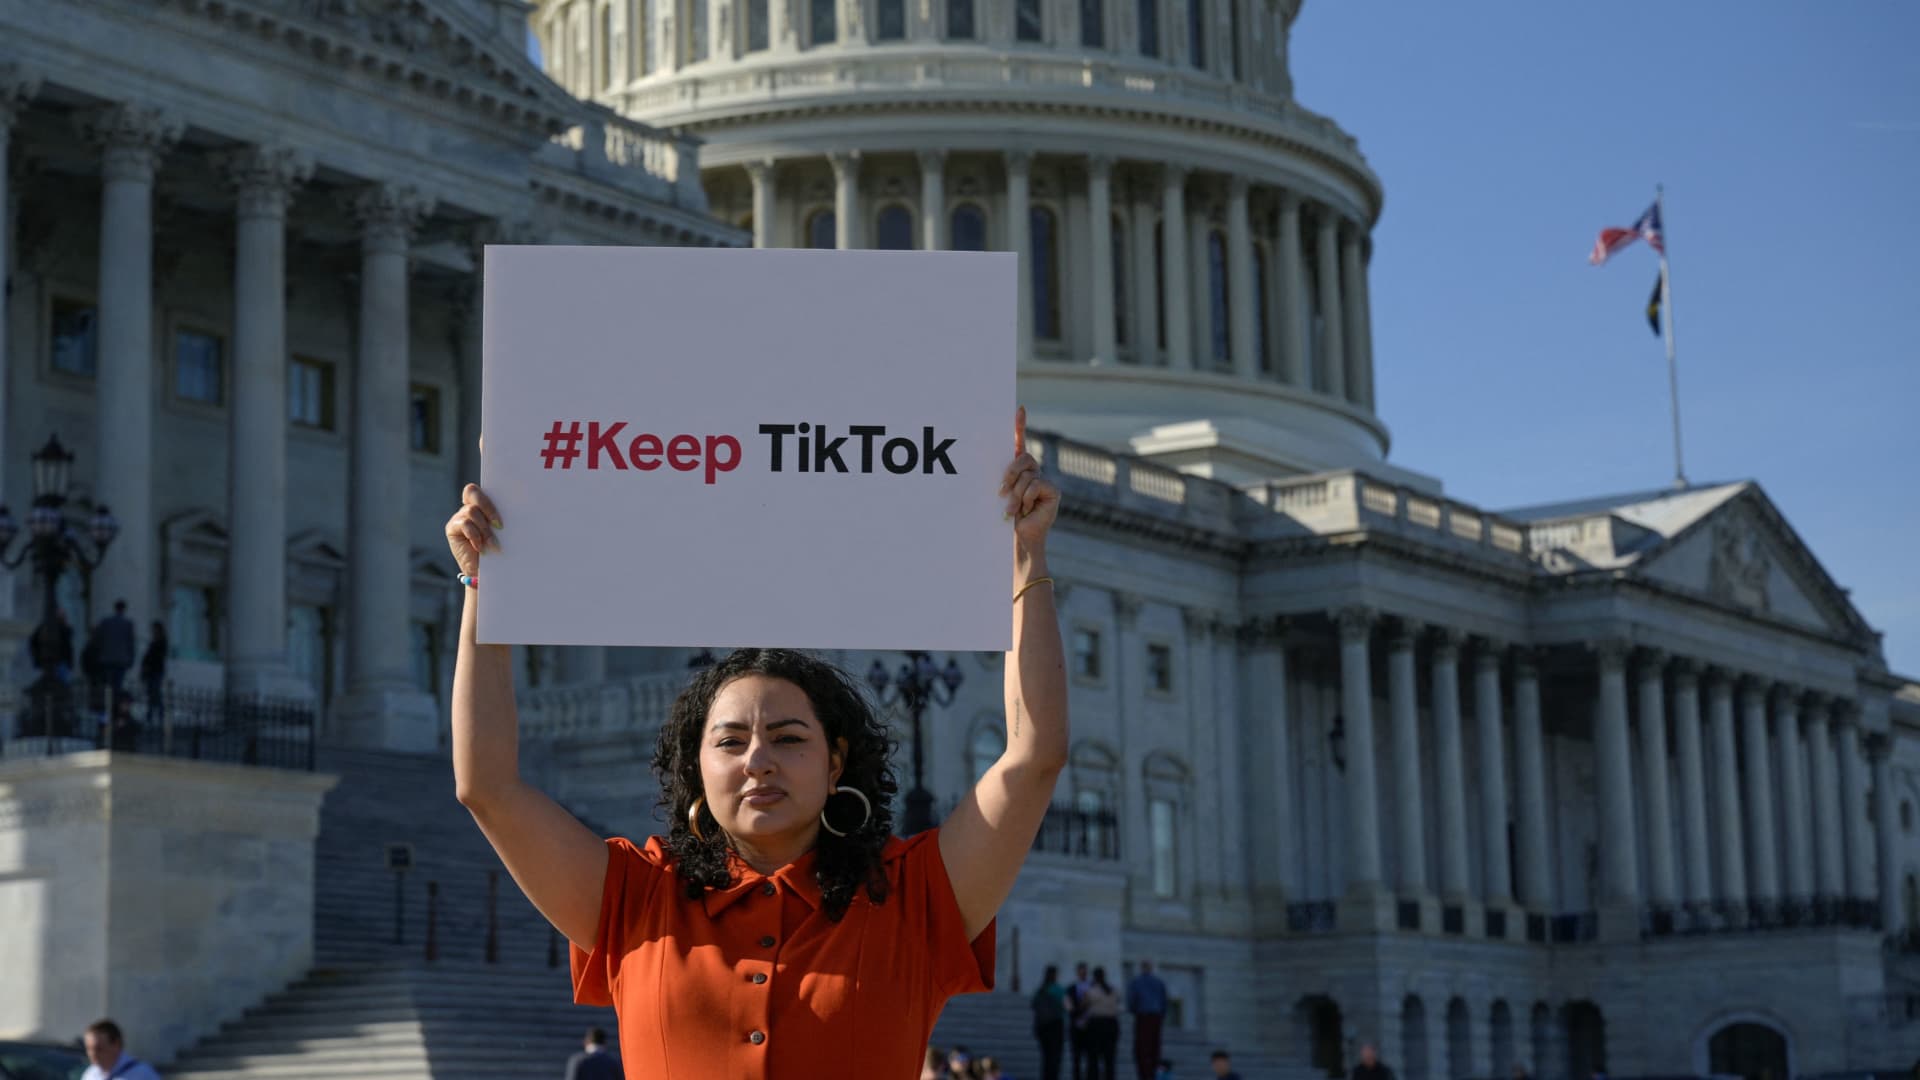 TikTok doubles advert purchase to combat potential U.S. ban in Congress